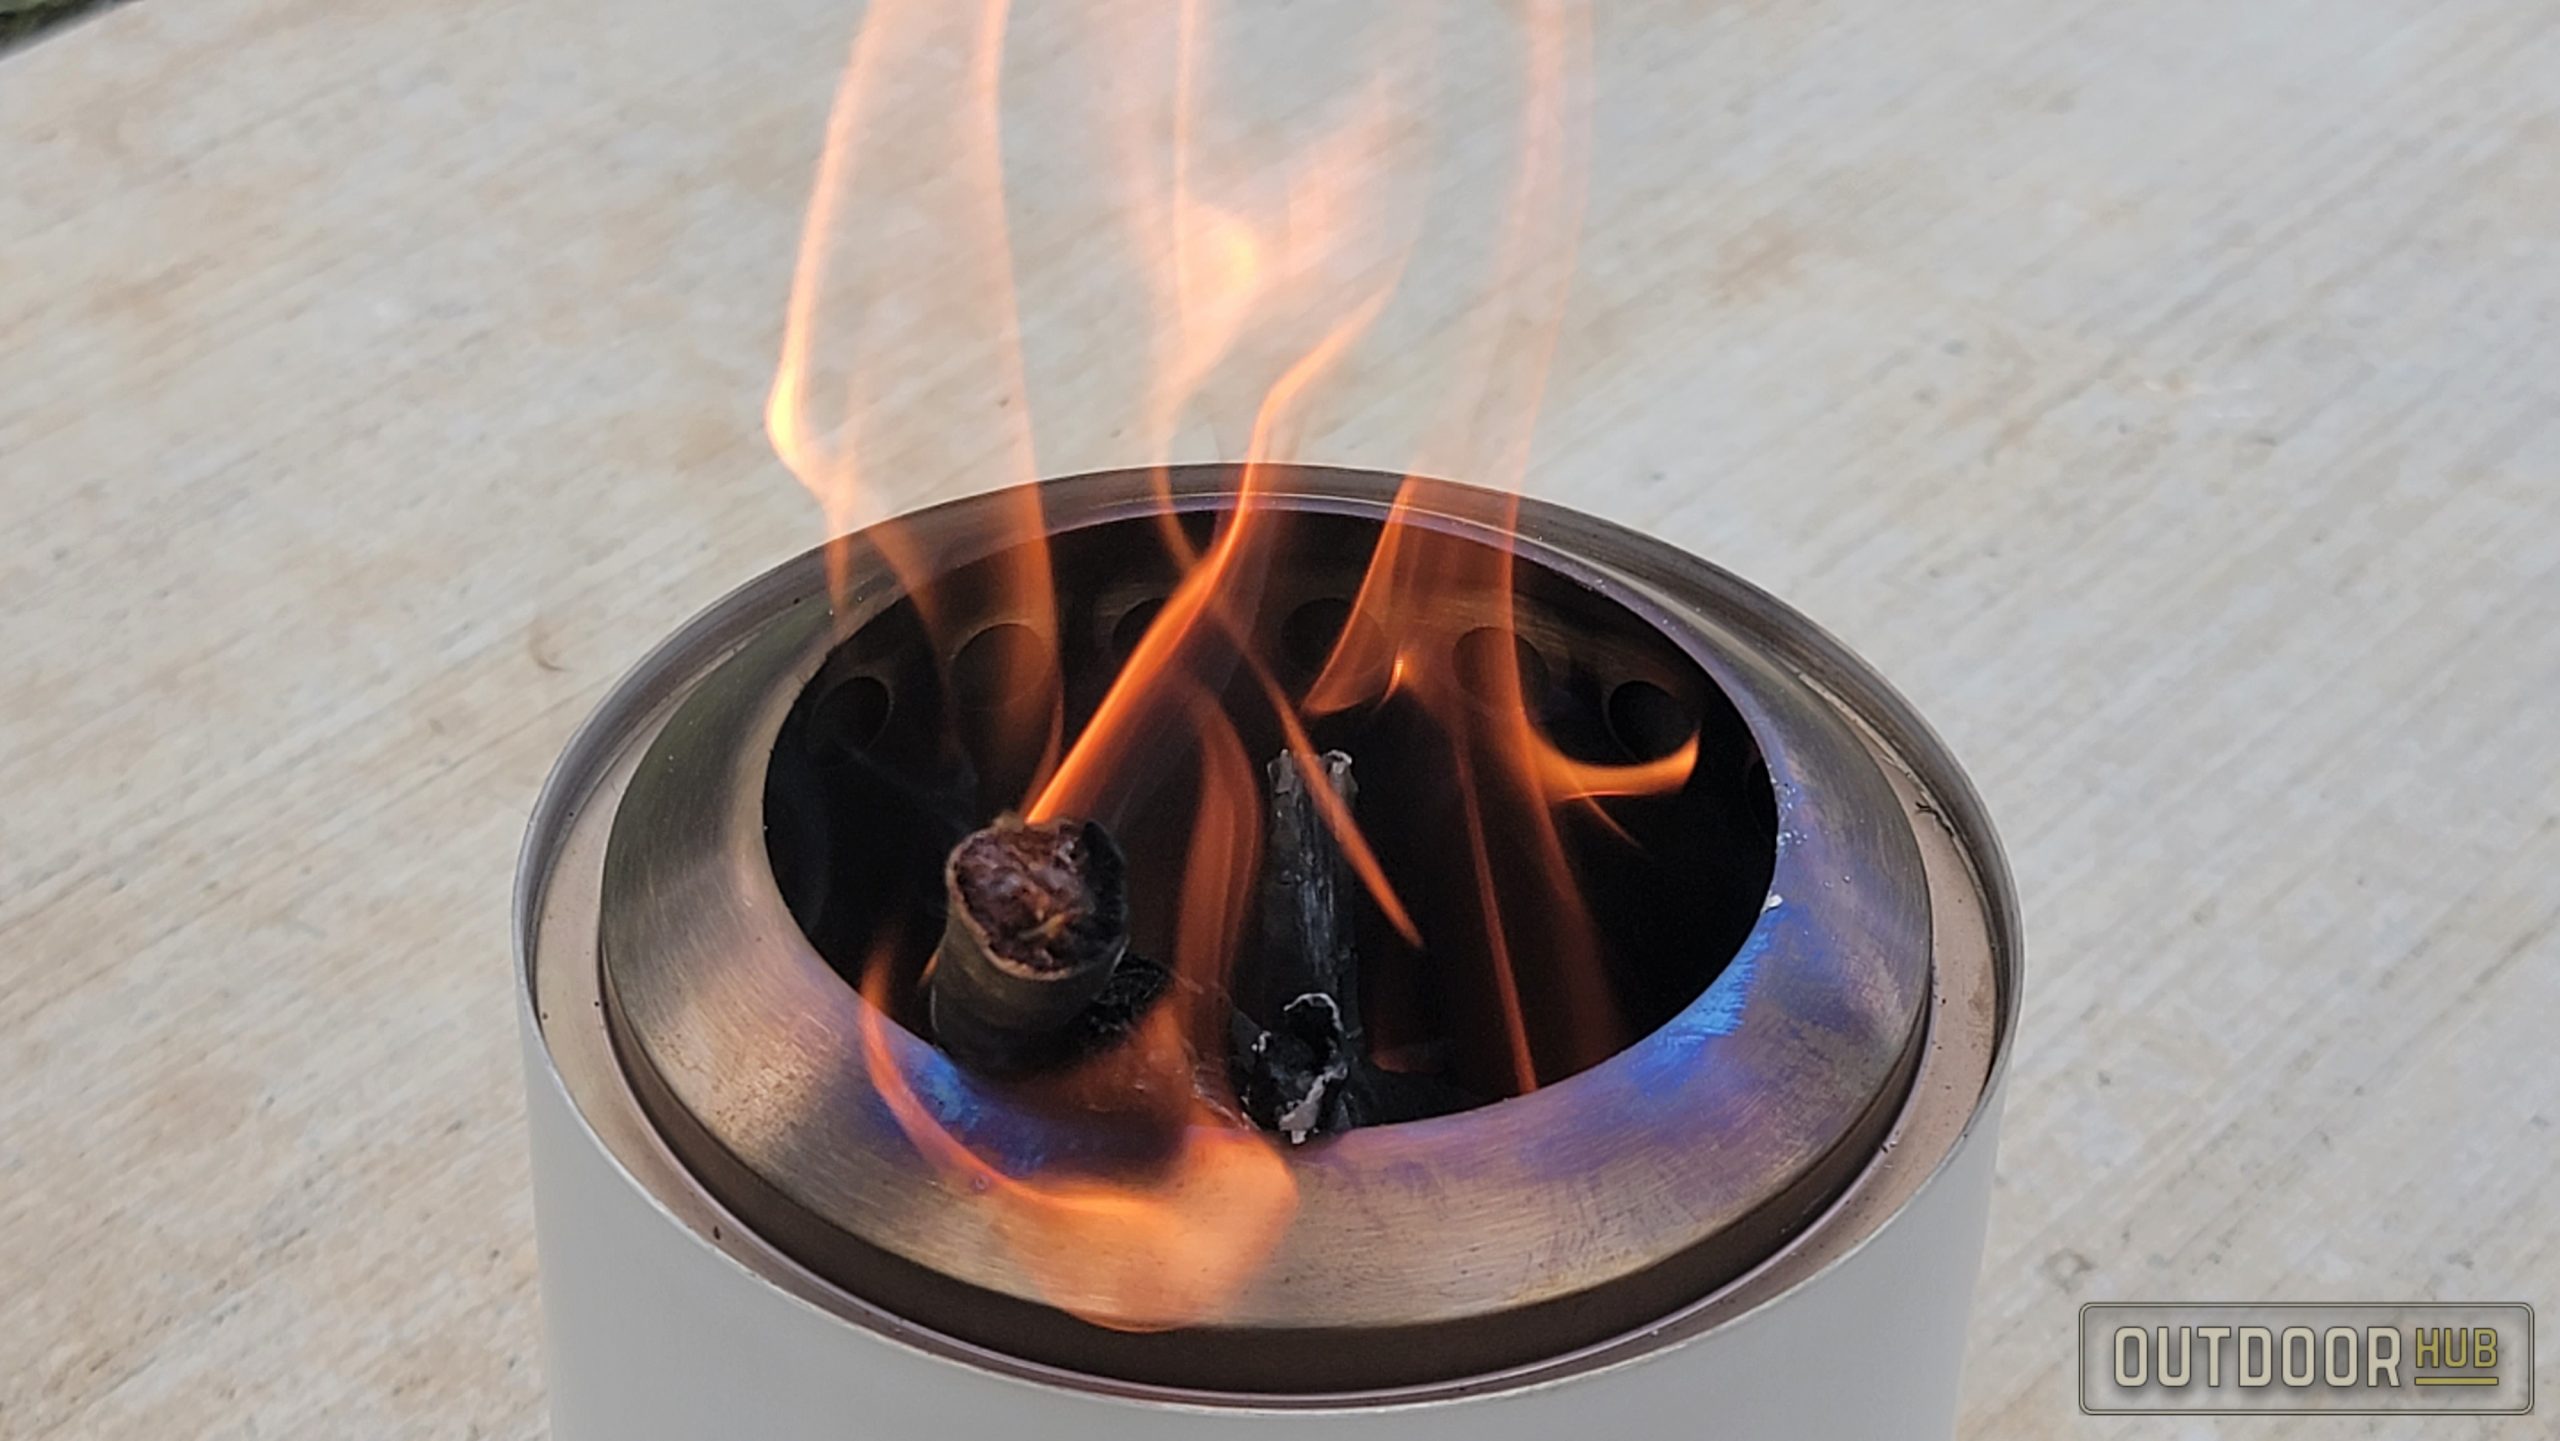 REVIEW: The New Solostove Mesa Tabletop Fire Pit